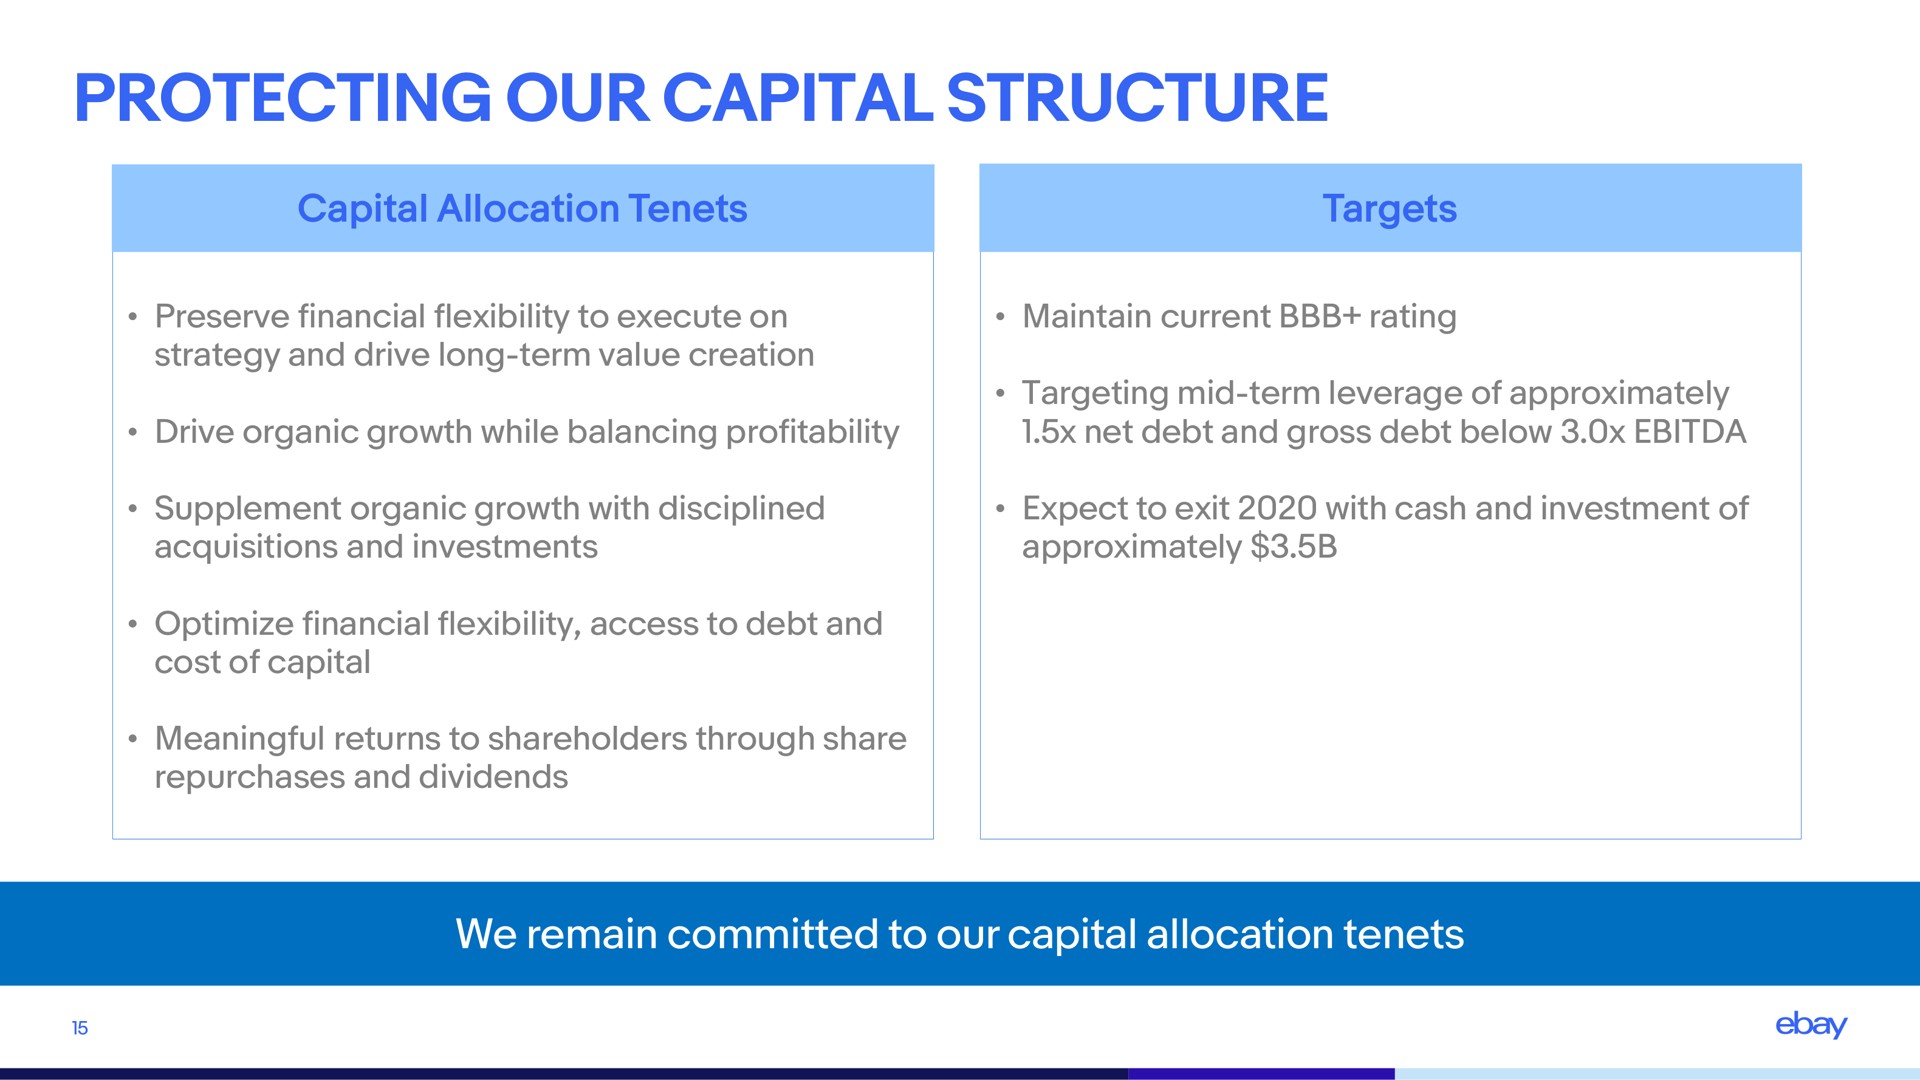 protecting our capital structure | eBay